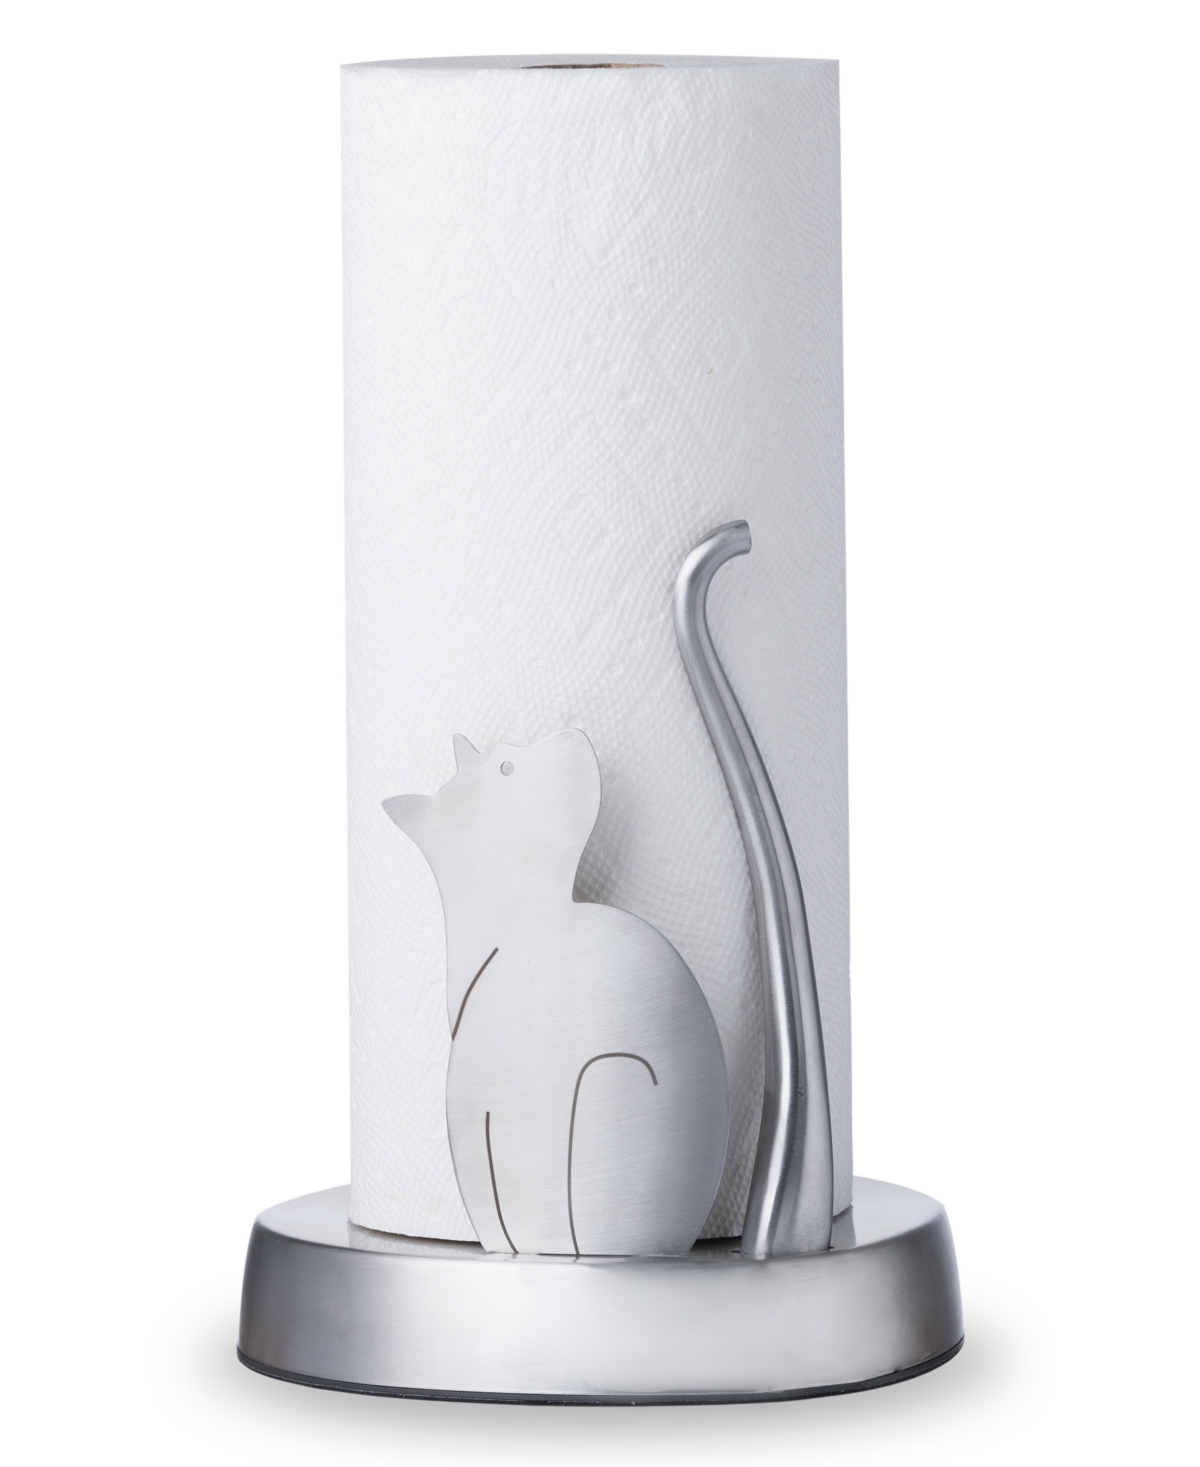 Meow Small Size Paper Towel Holder - Silver-Tone